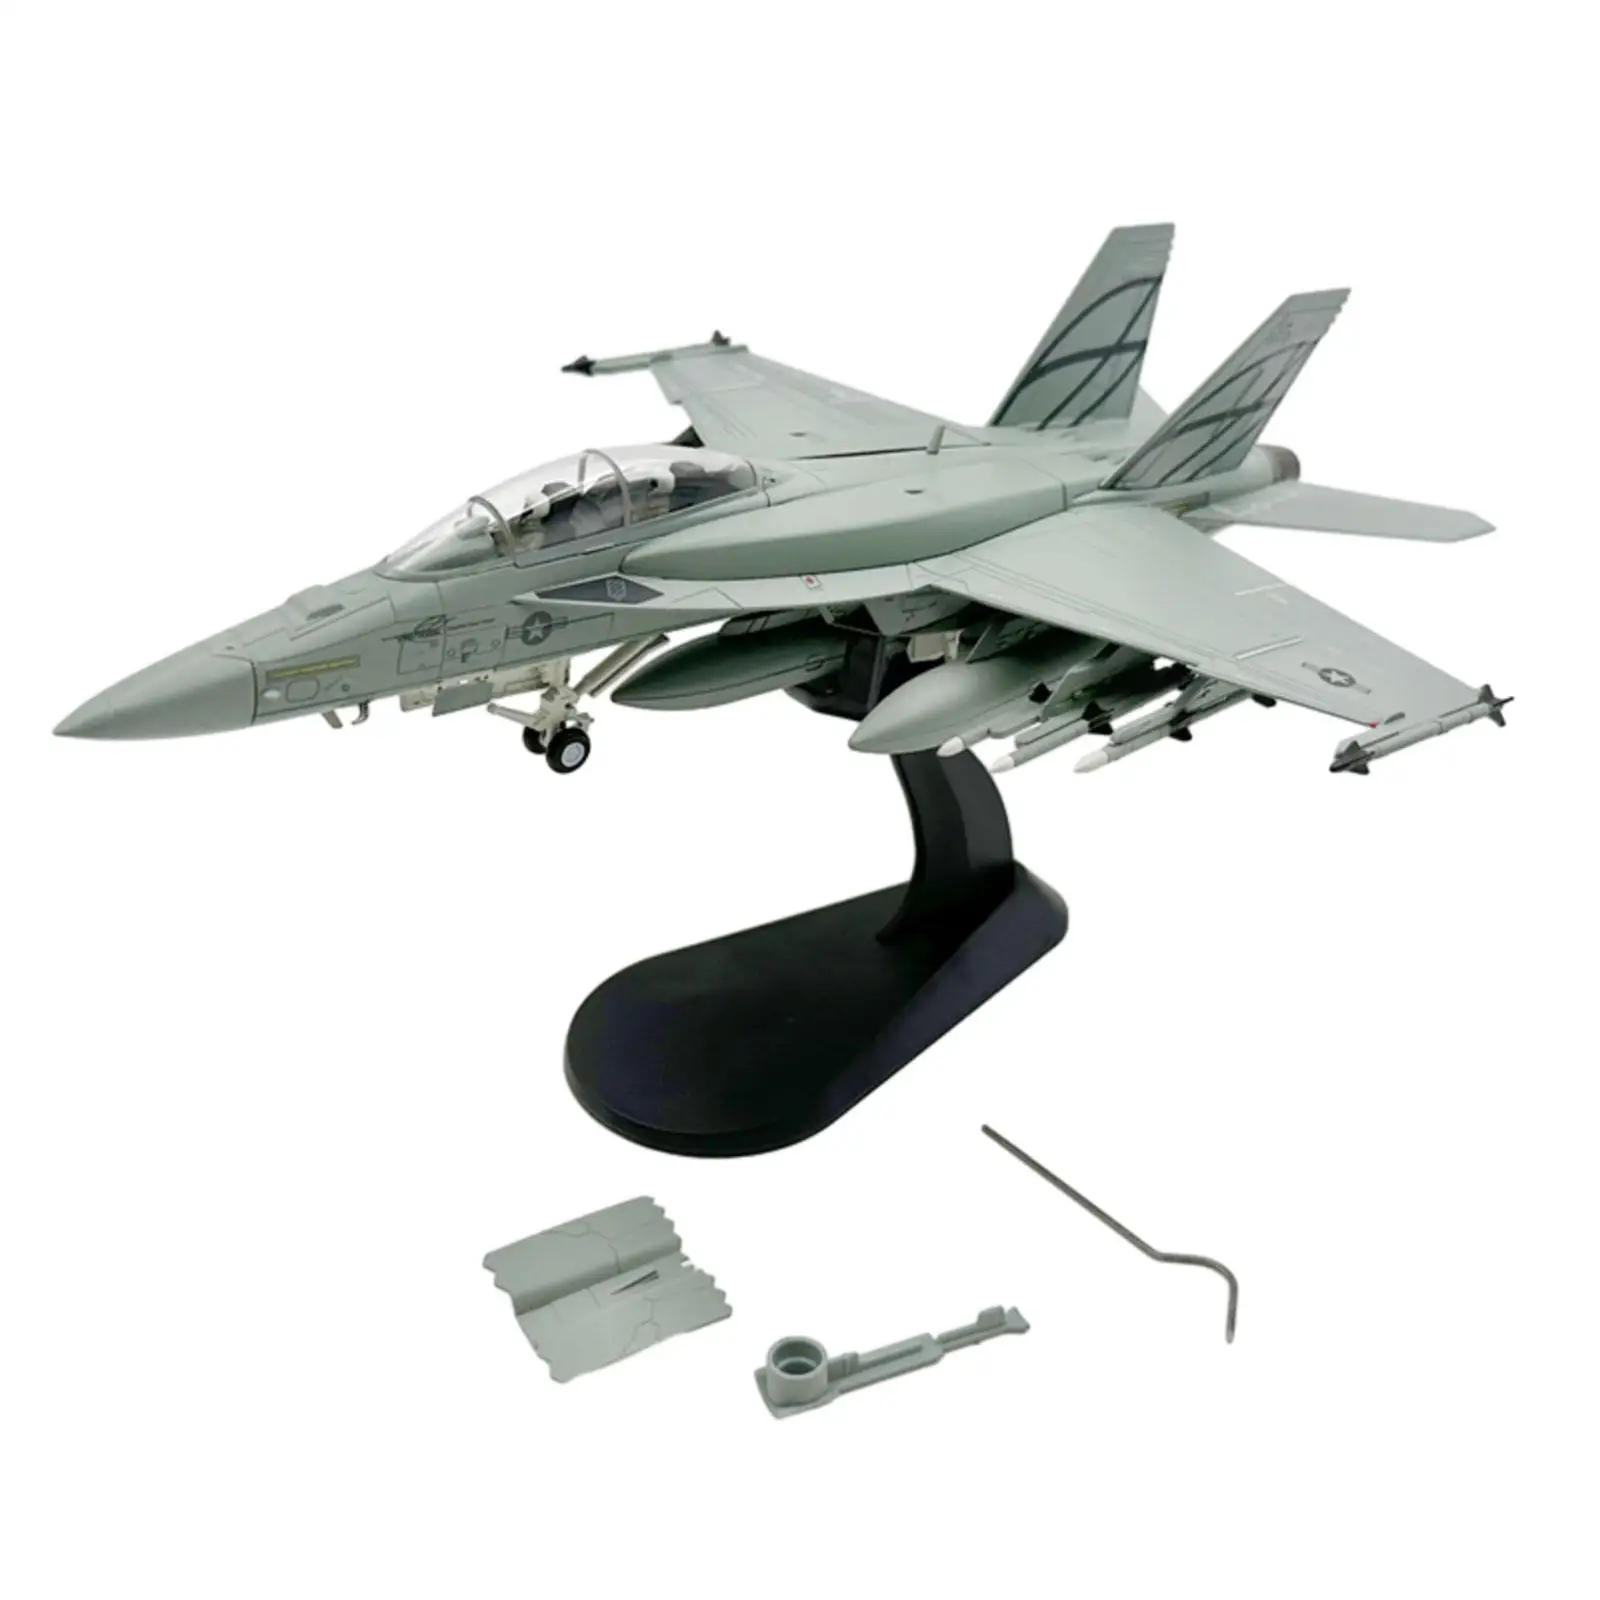 1/72 Scale Diecast Alloy Model Aircraft Collectibles for Collection Gift